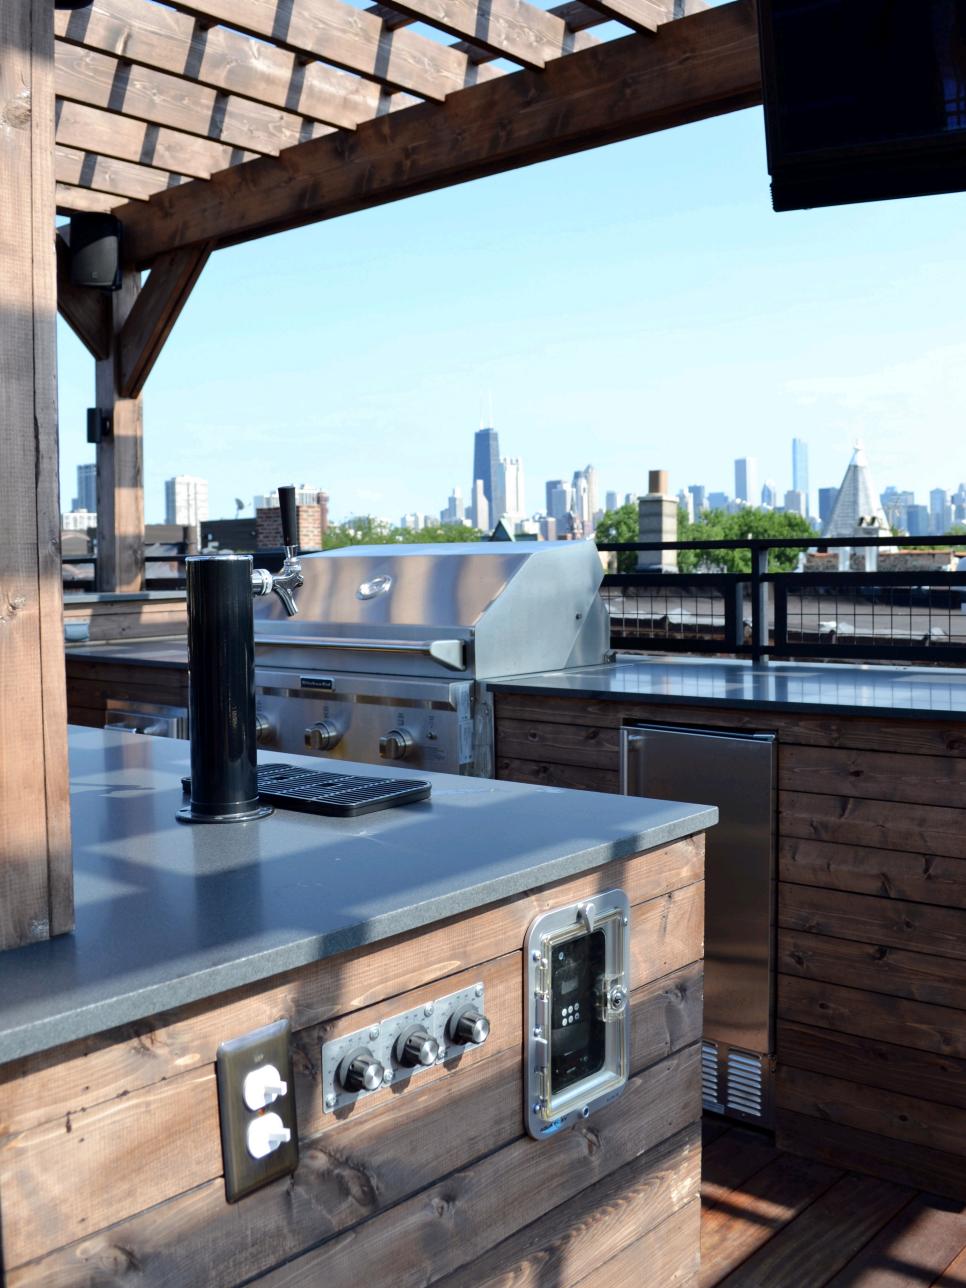 Urban Outdoor Kitchen With Stainless Steel Counters and Grill